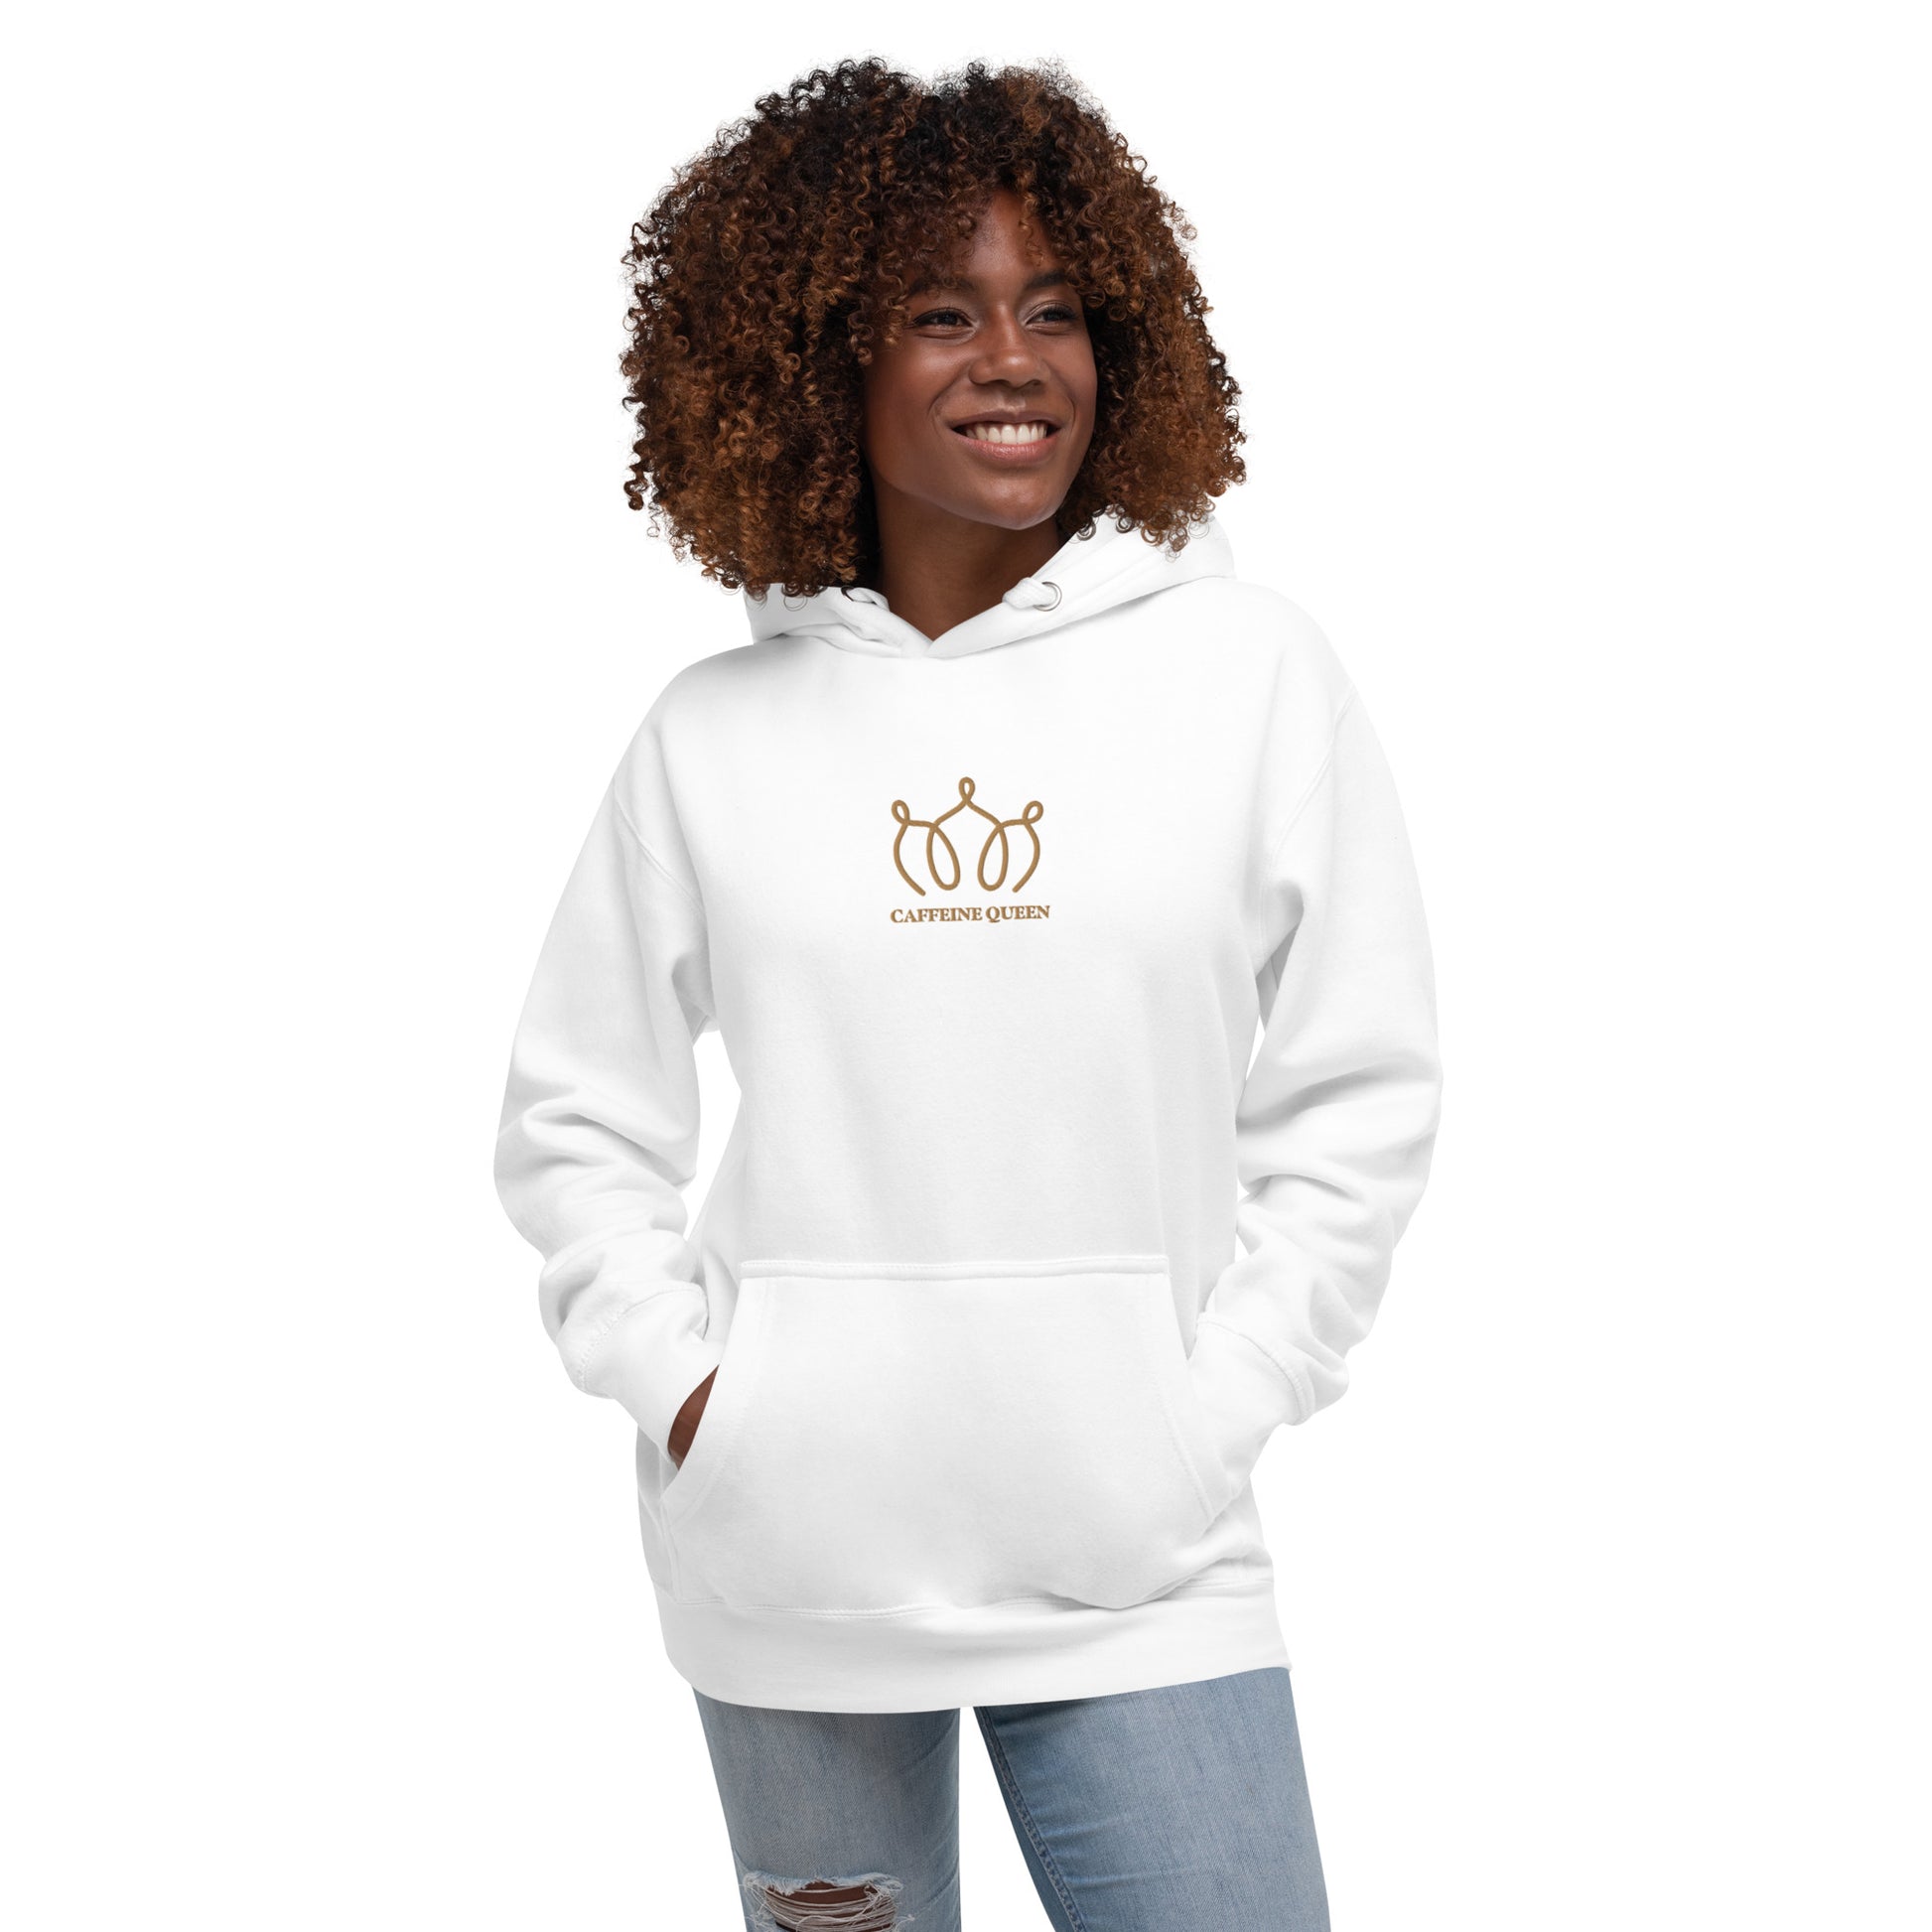 Woman wearing a white hoodie with an embroidered crown and Caffeine Queen text on the front.